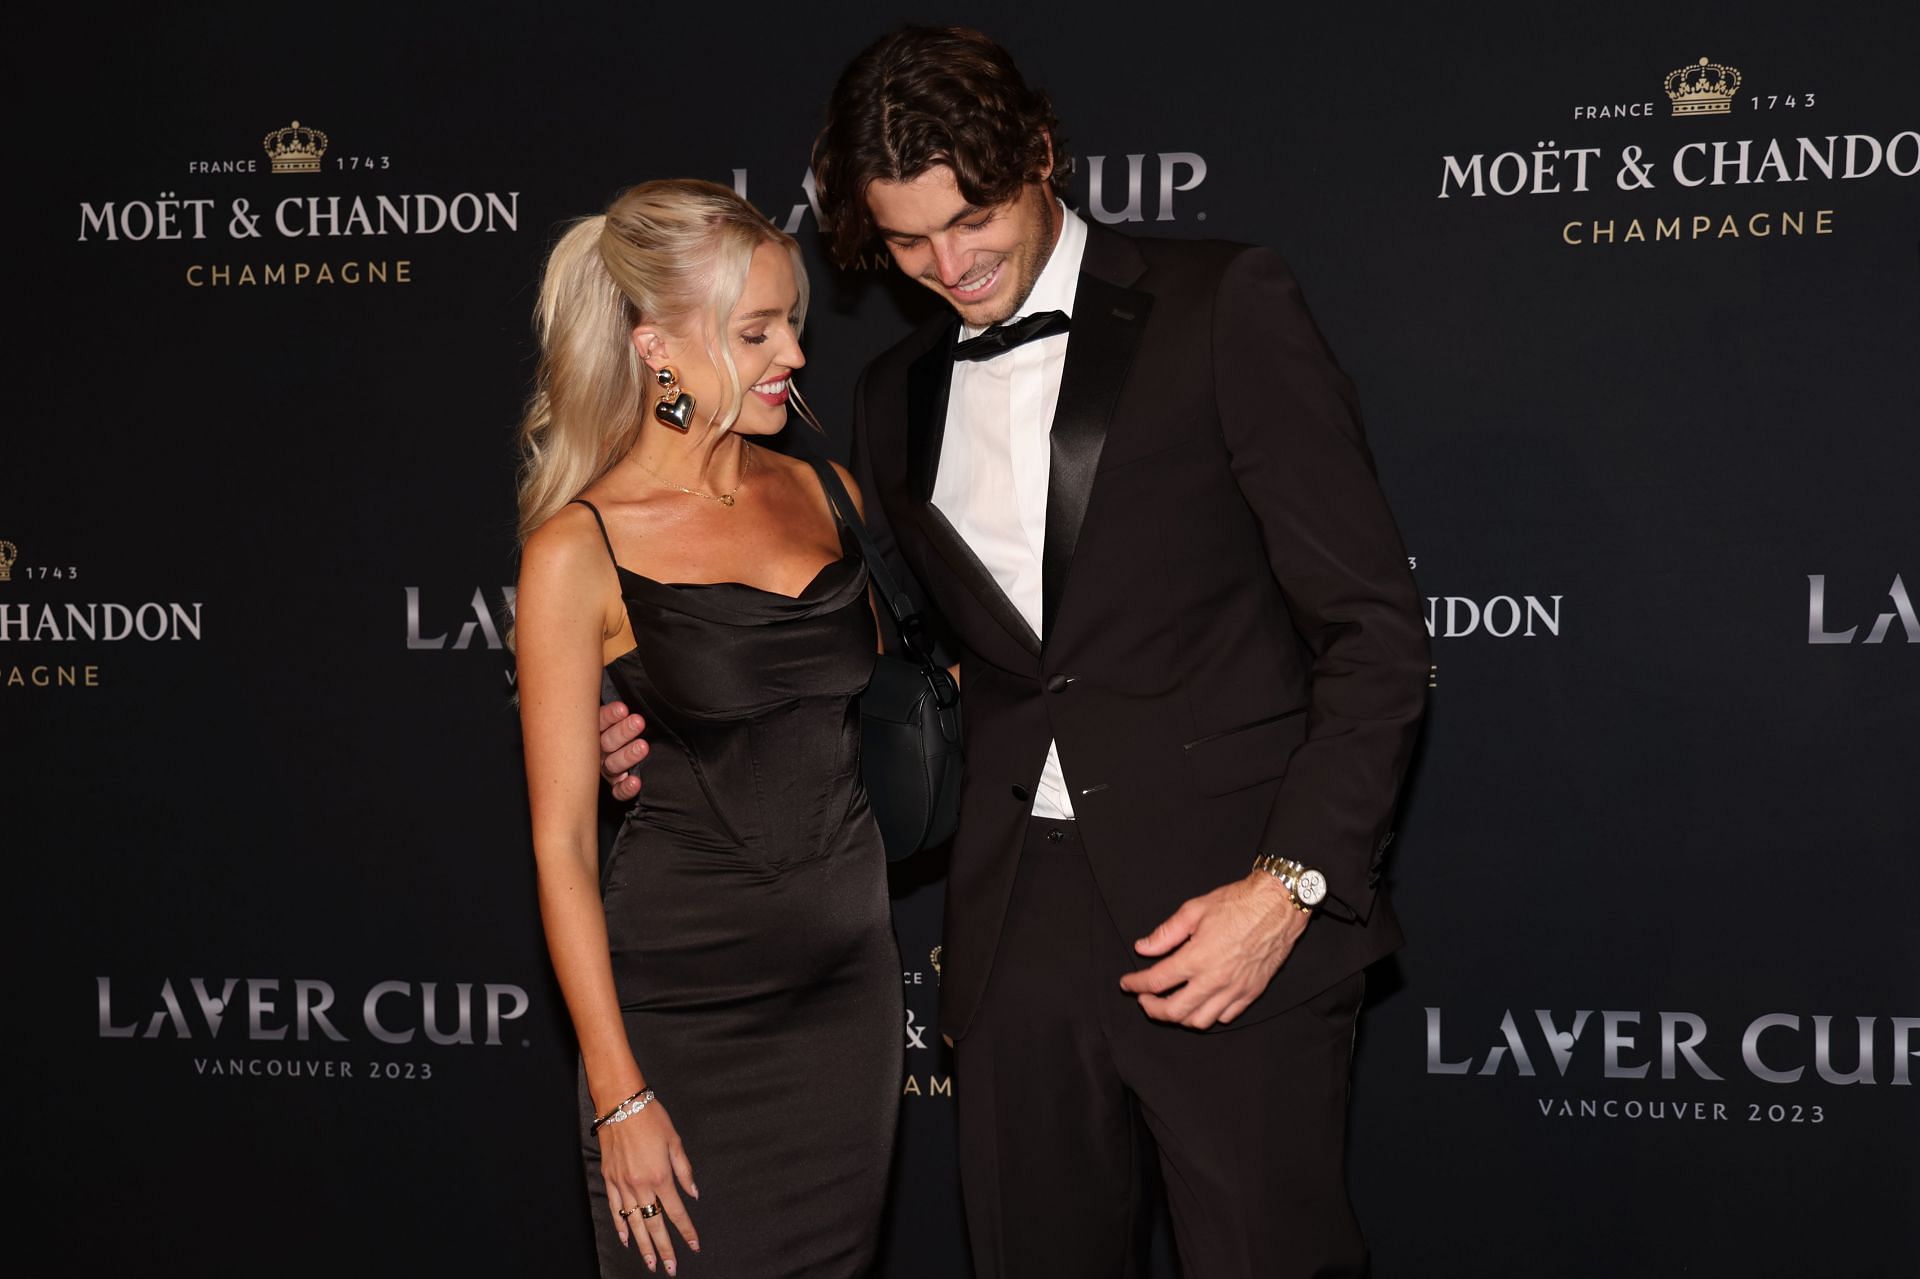 The couple pictured at the 2023 Laver Cup